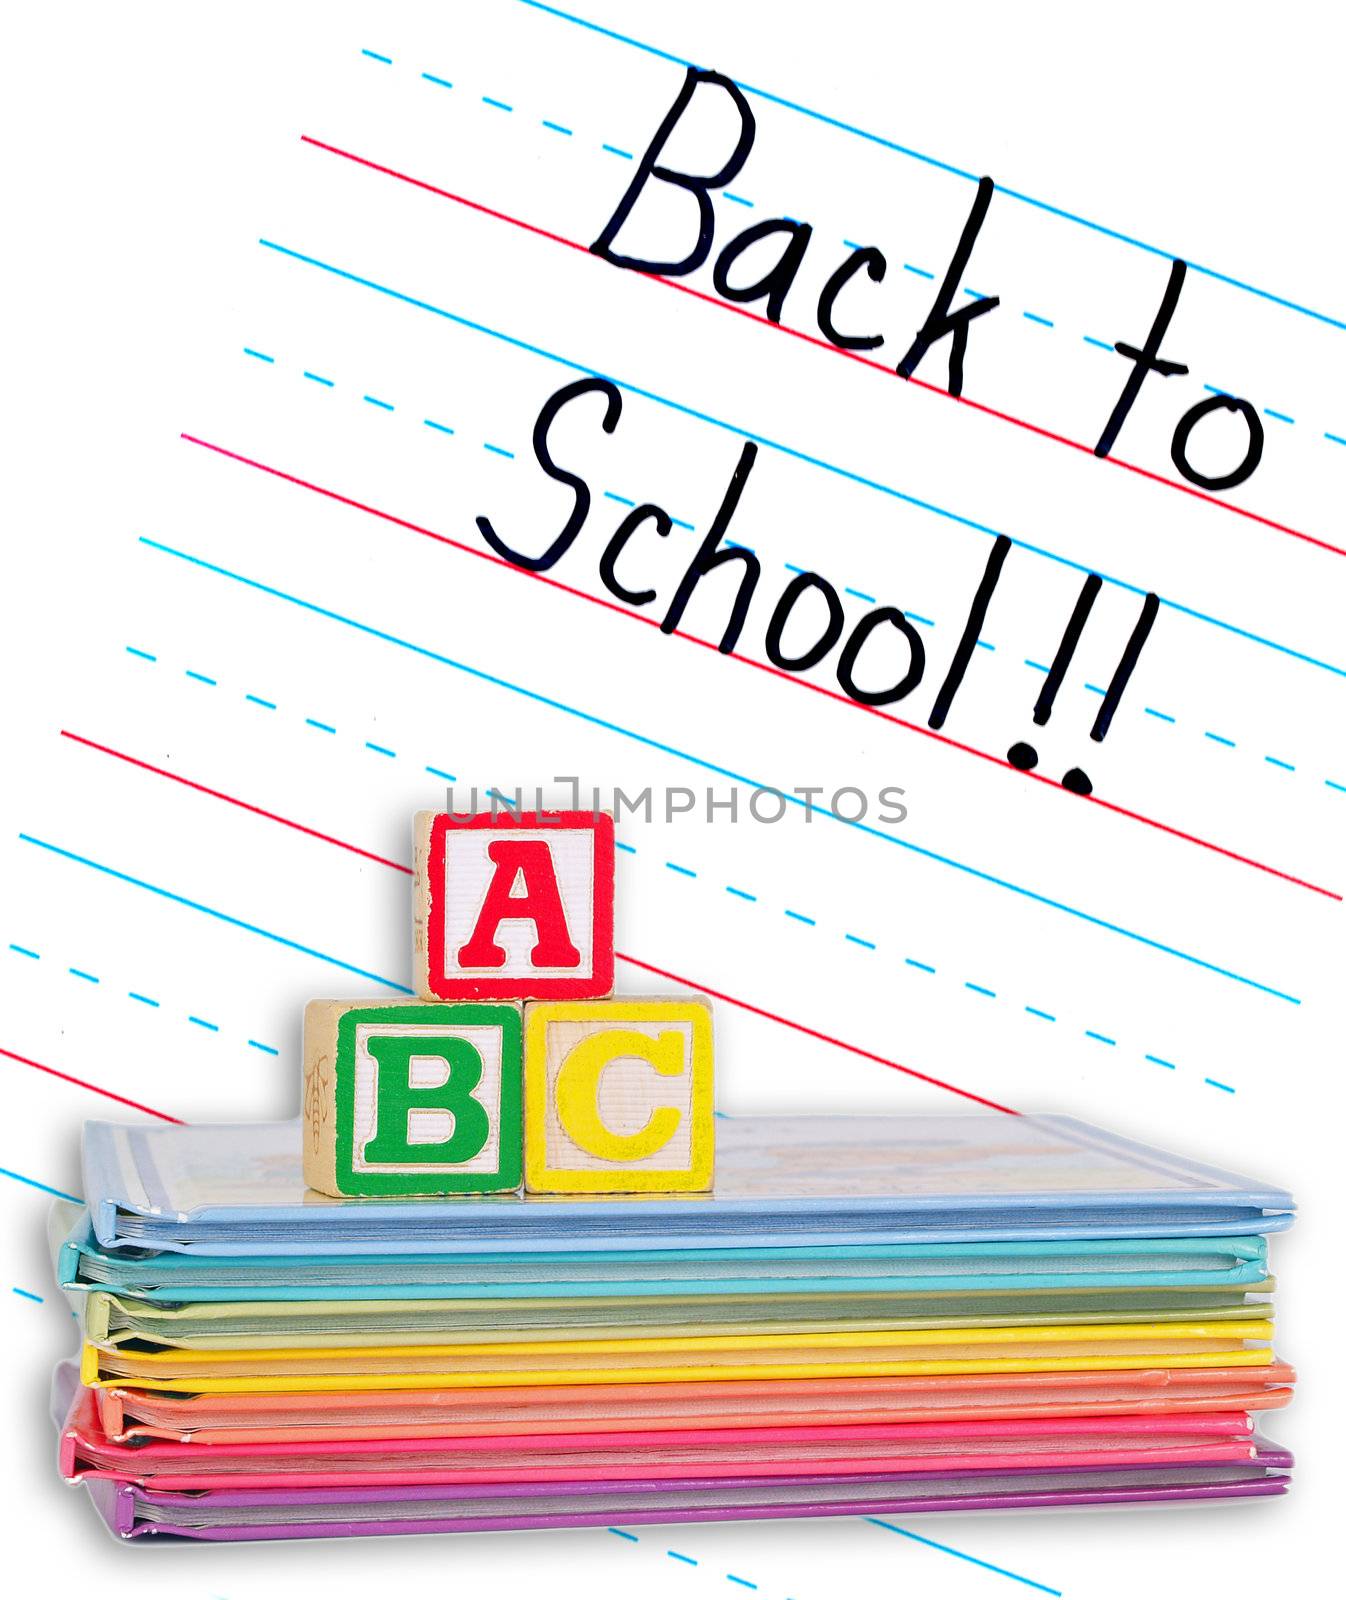 Back to School Written on a Lined Dry Erase Board with Books